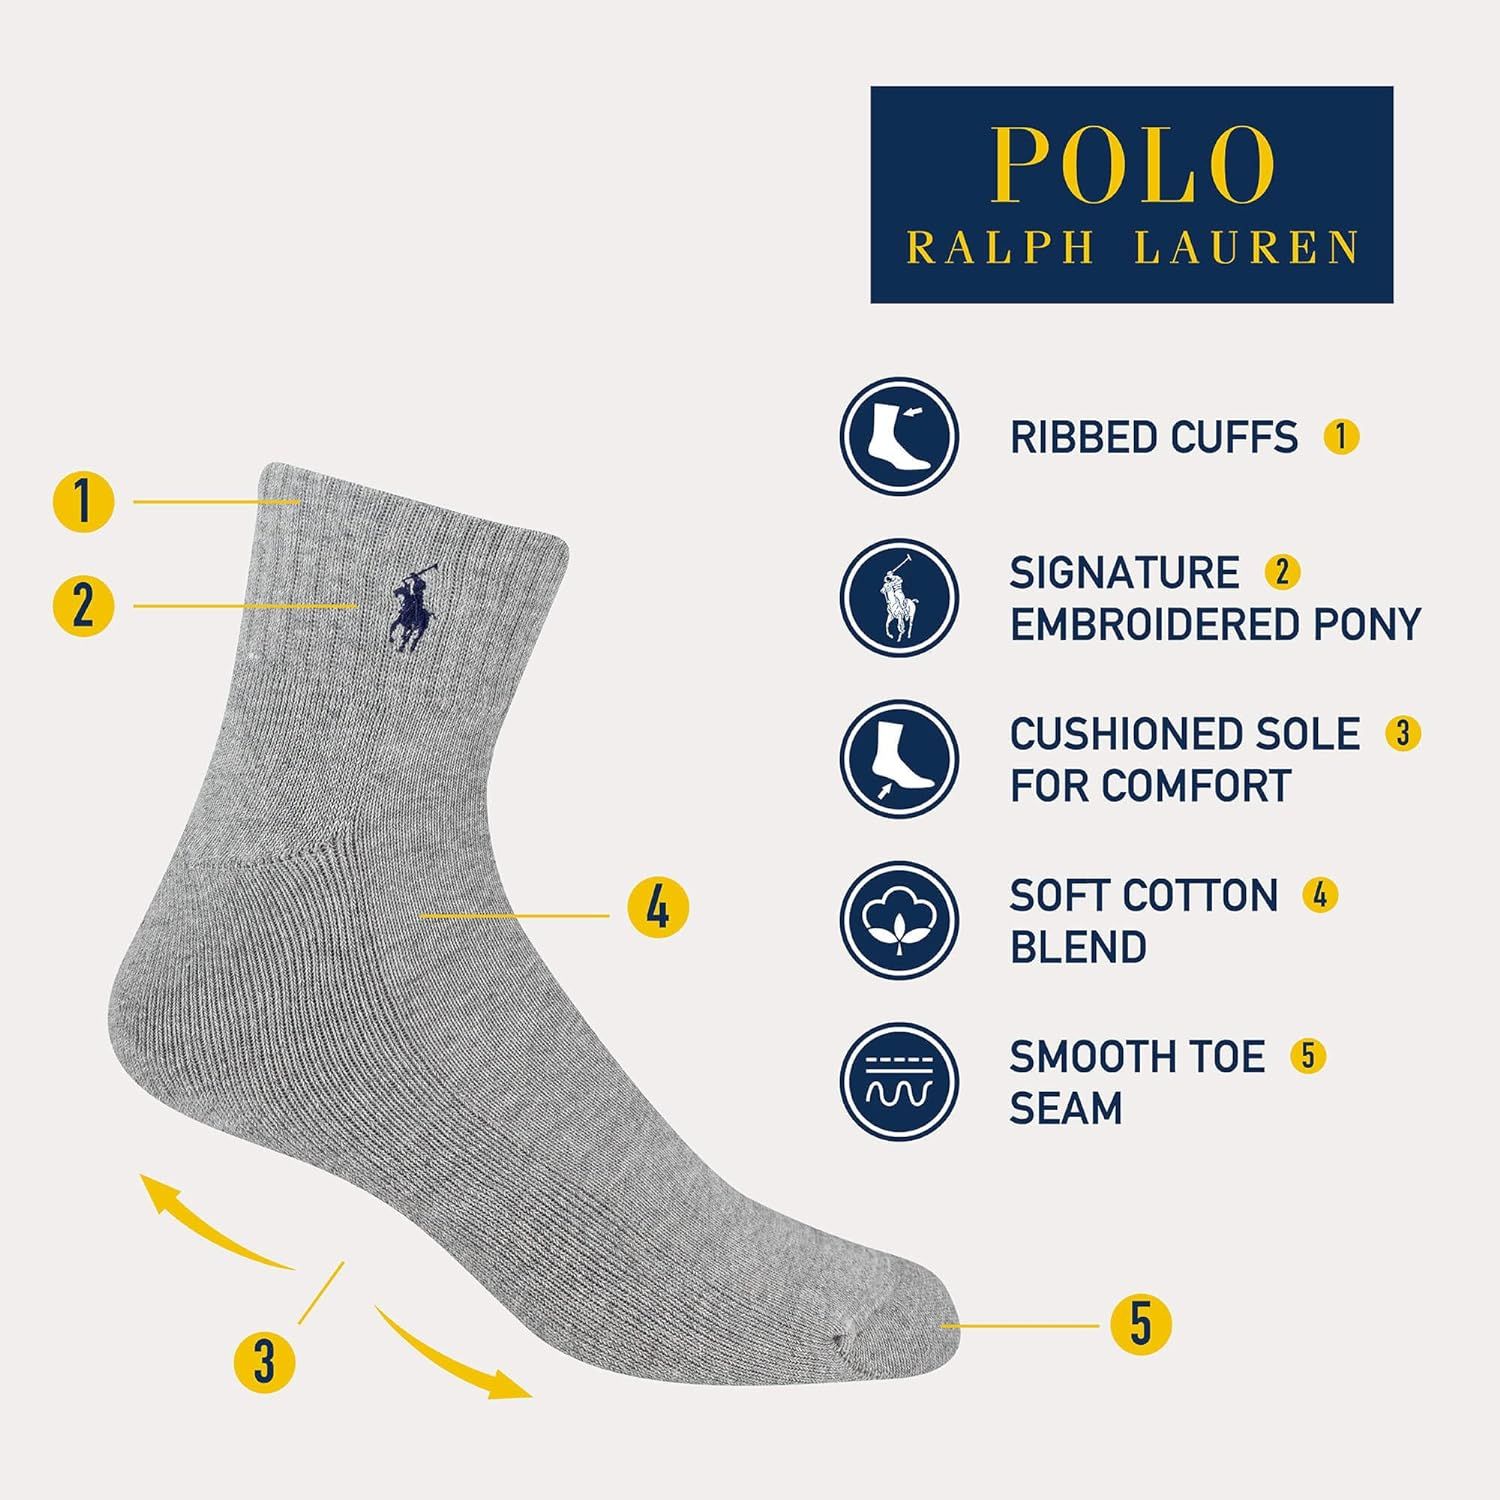 POLO RALPH LAUREN Men's Classic Sport Solid Ankle Socks-6 Pair Pack-Athletic Cushioned Cotton | Amazon (US)